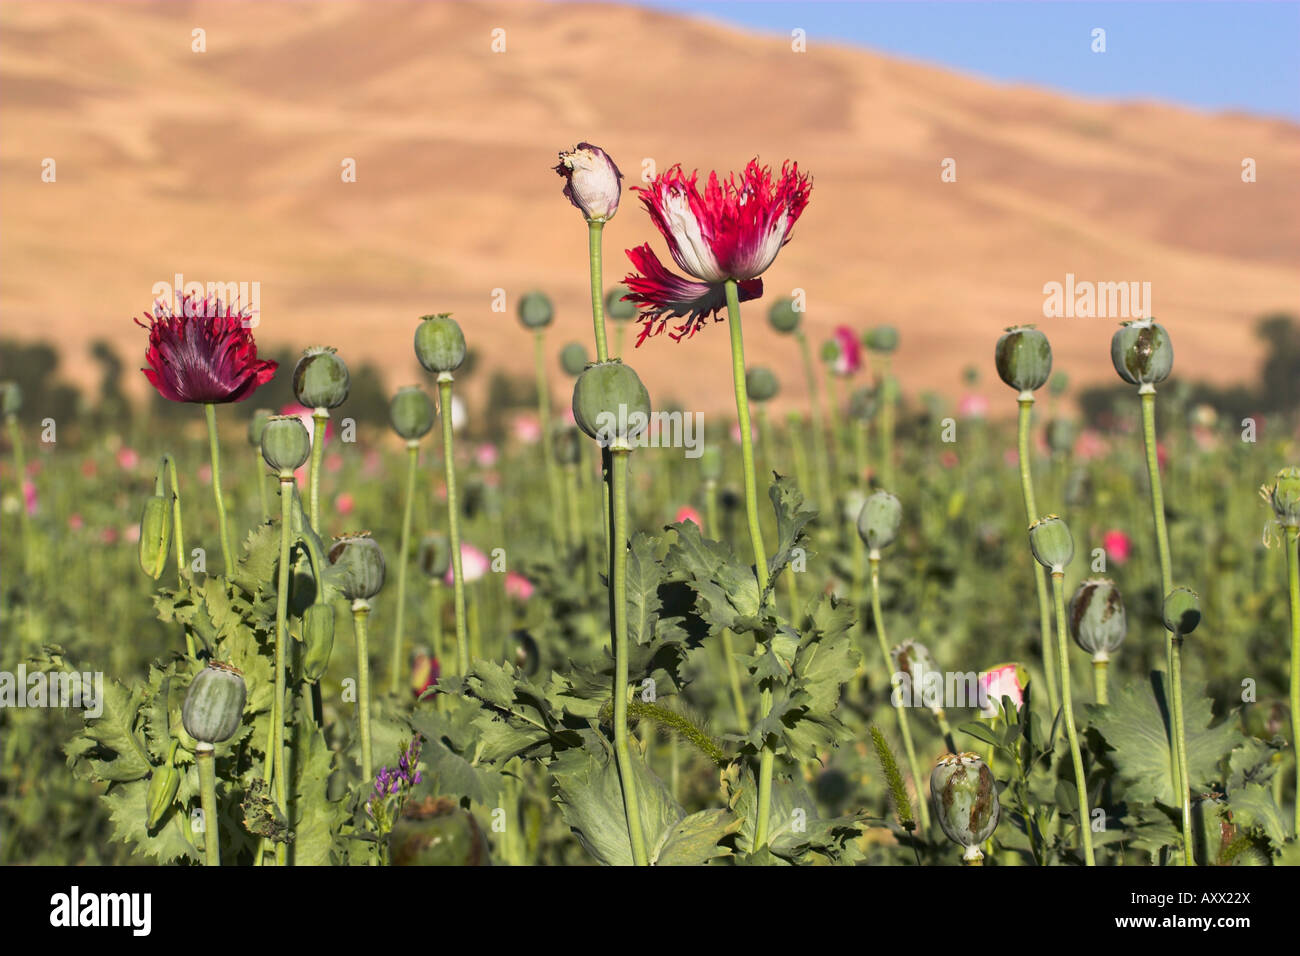 Poppy field between Daulitiar and Chakhcharan, Afghanistan, Asia Stock Photo